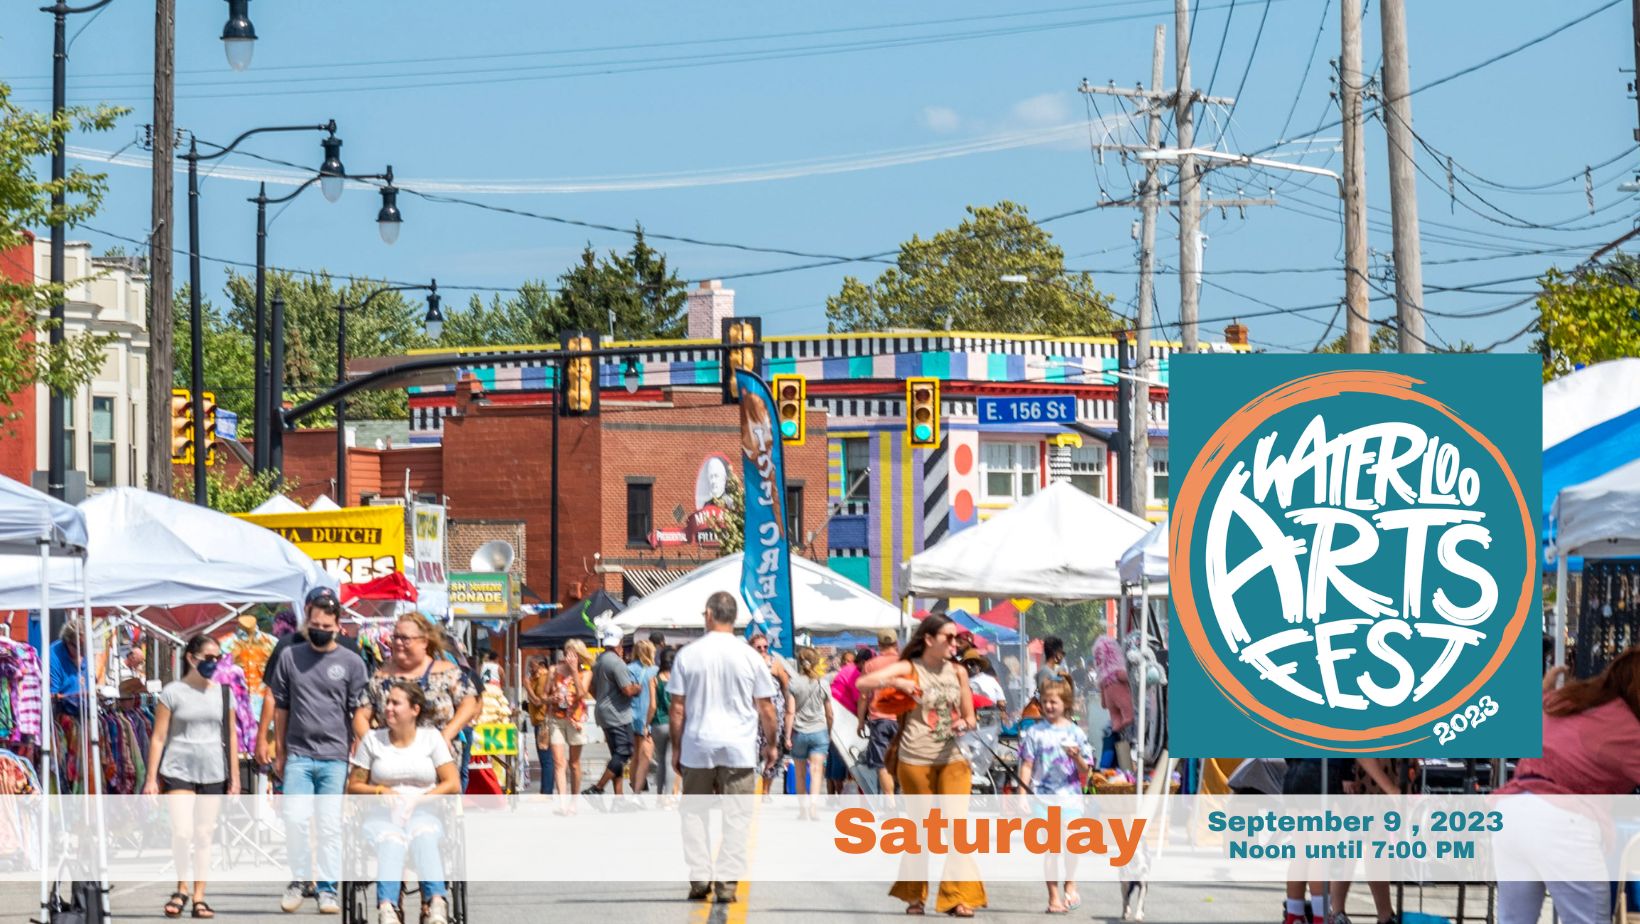 2023 Waterloo Arts Fest SPG Events and Festivals